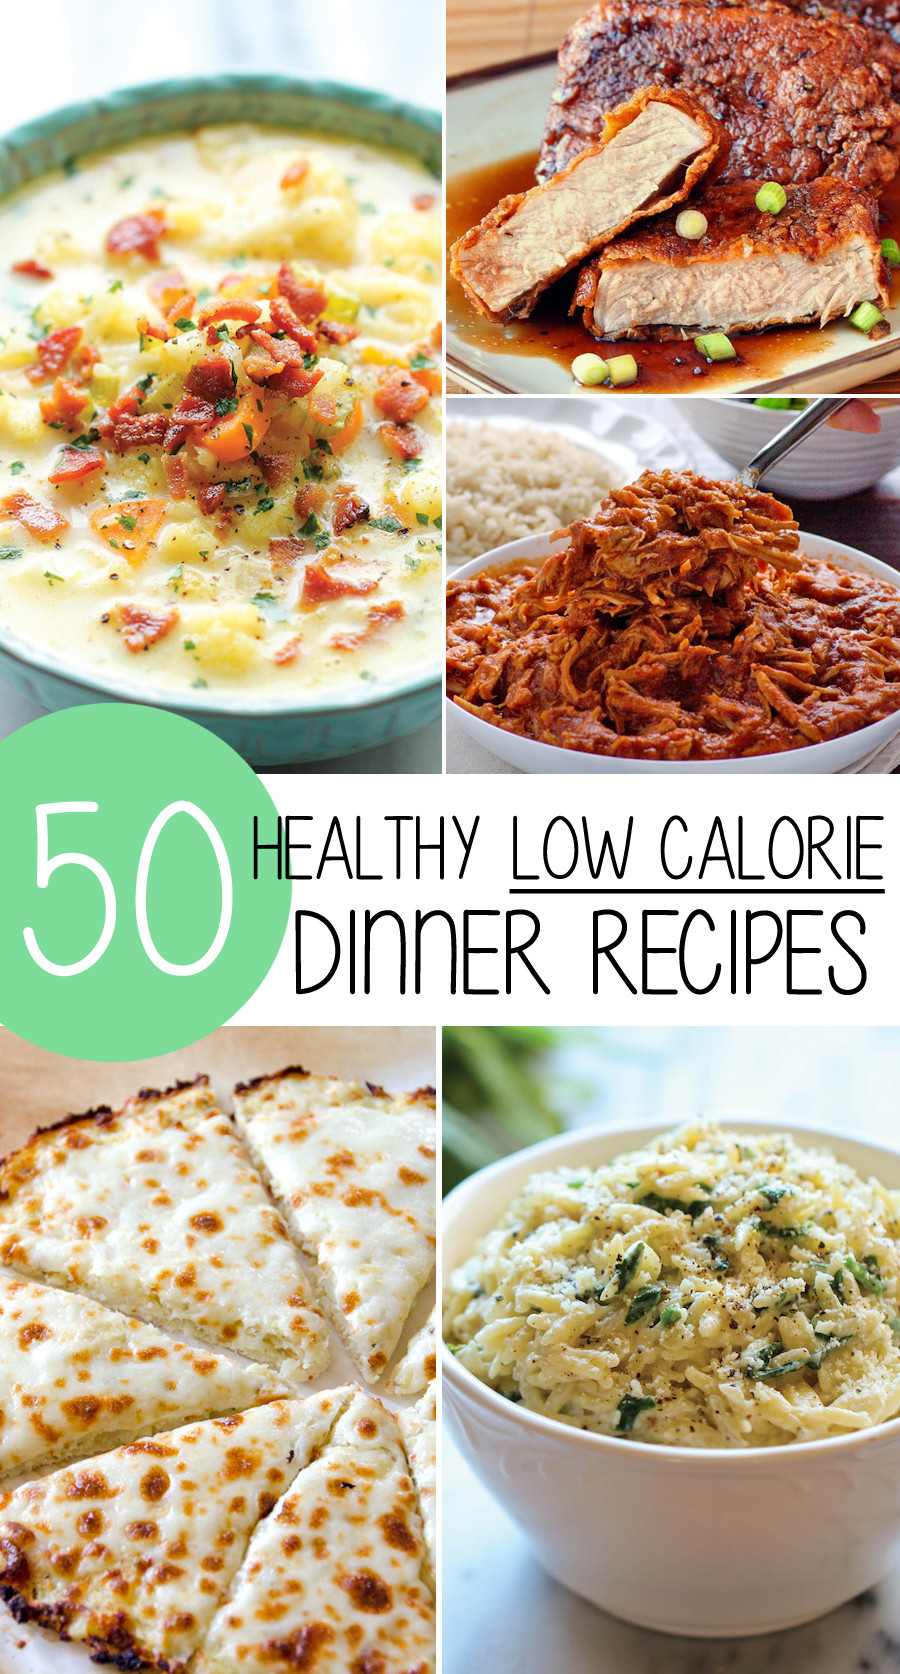 Low Calorie Healthy Dinners
 50 Healthy Low Calorie Weight Loss Dinner Recipes